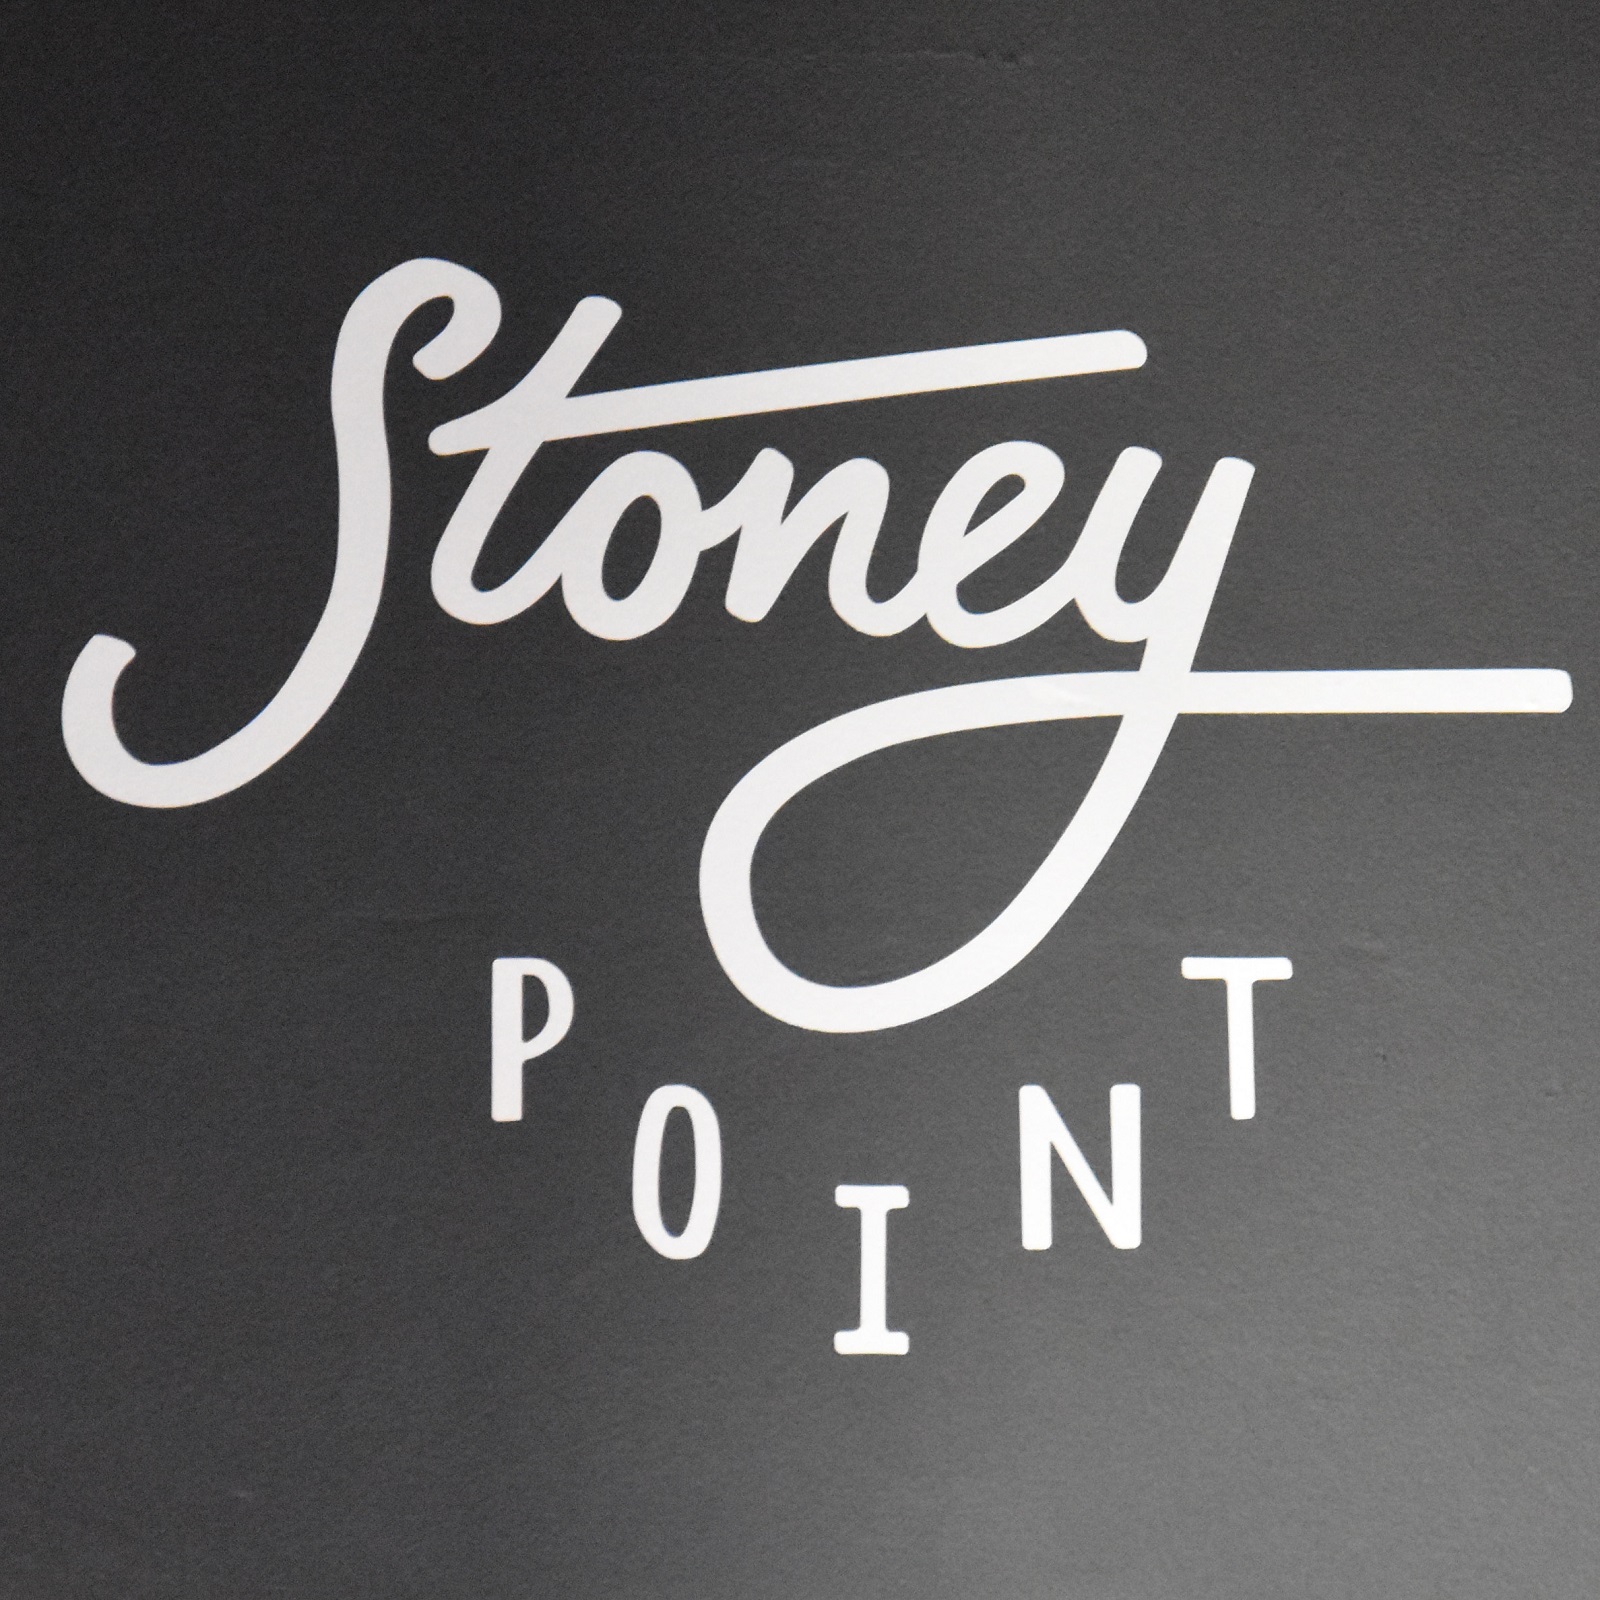 The logo / name of Stoney Point, written on the black board behind the counter.